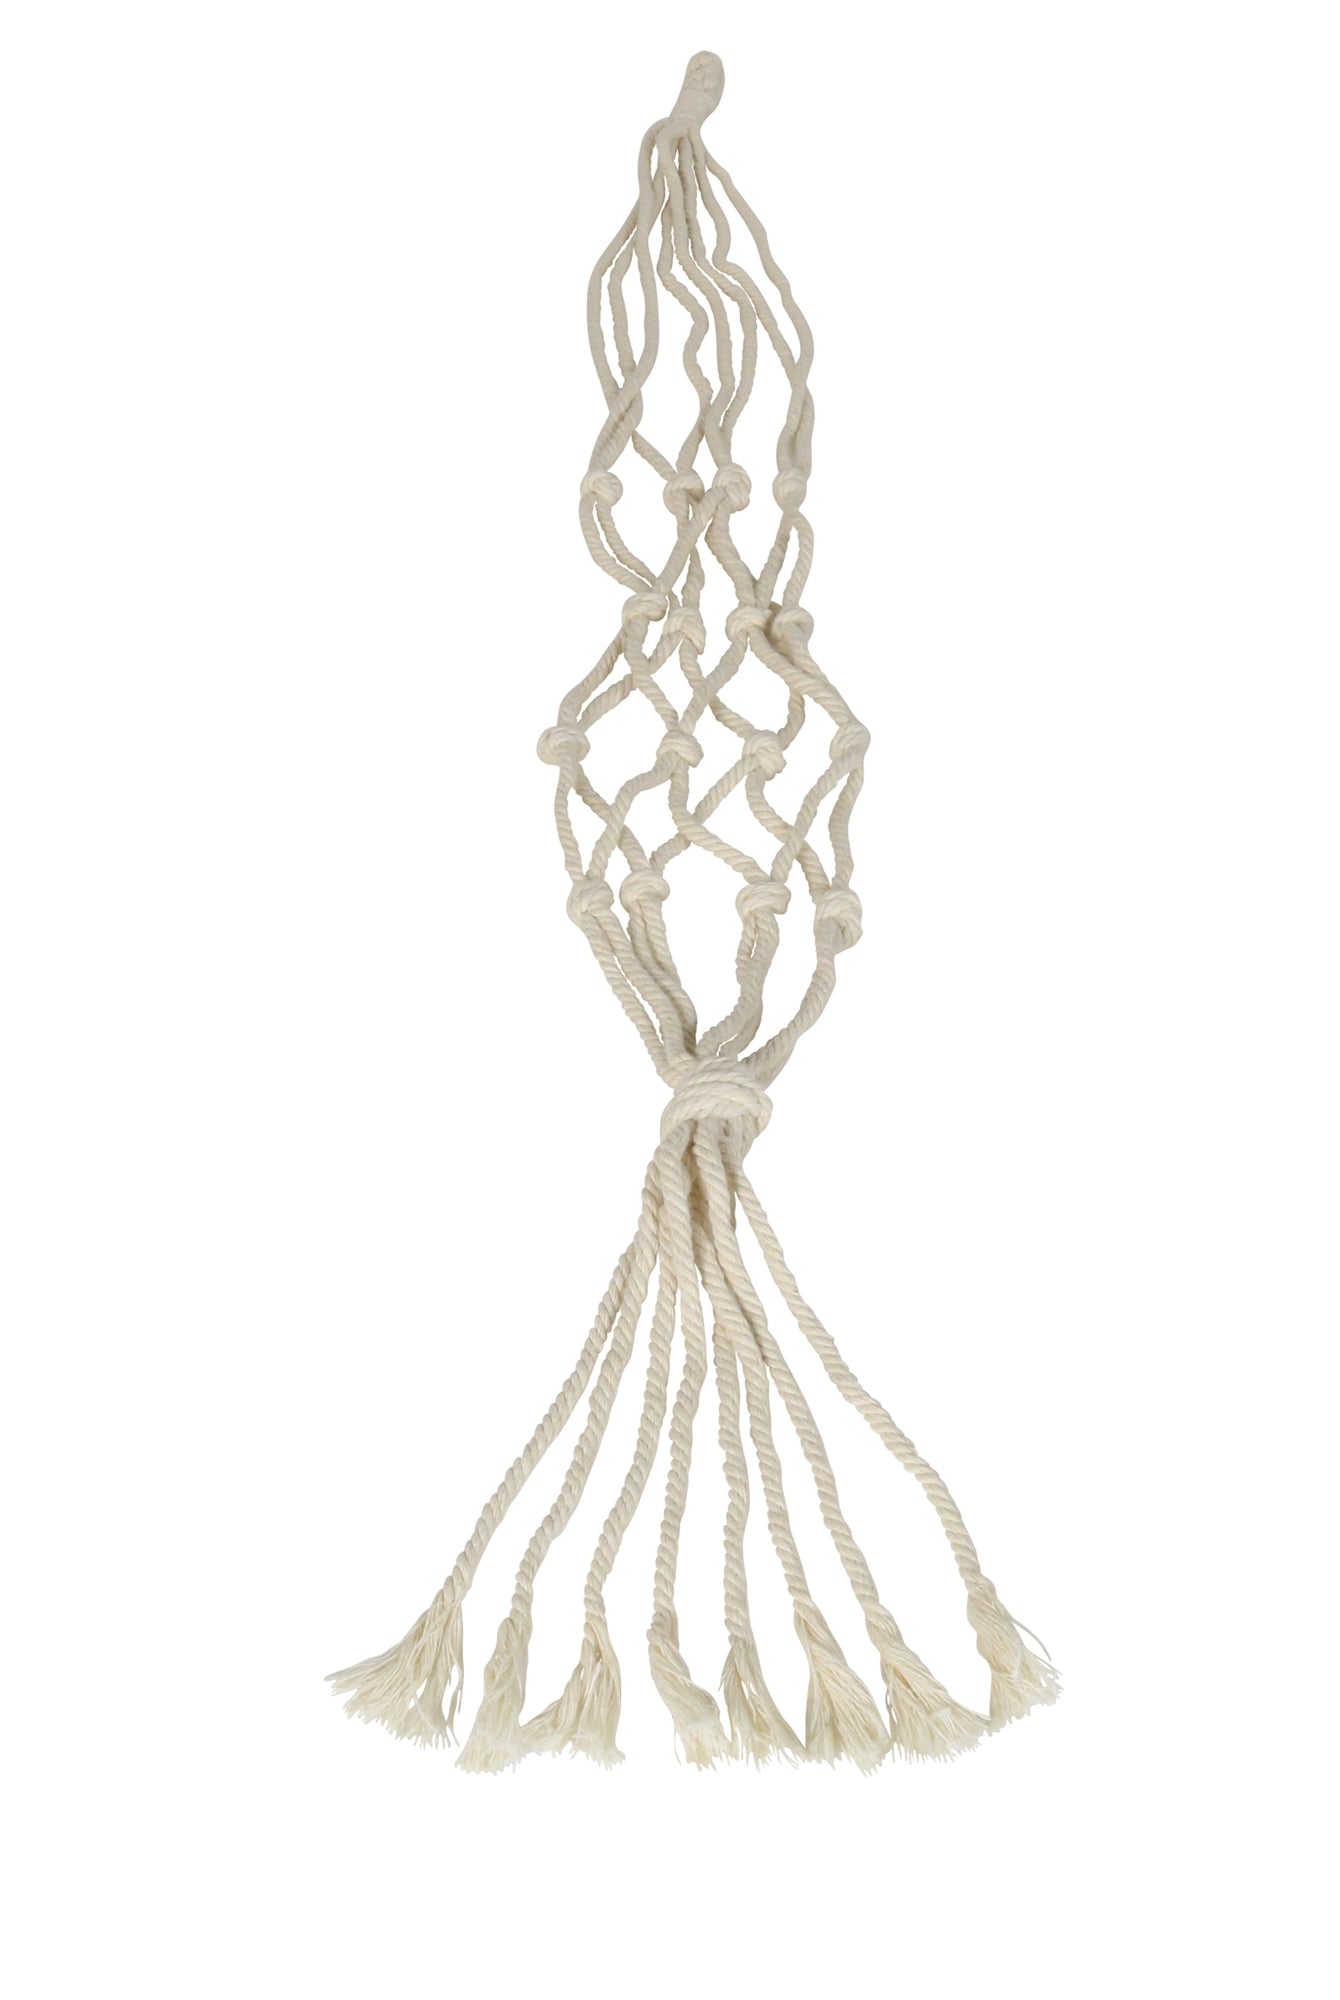 Macrame Hanger-Home Decor-Vixen Collection, Day Spa and Women's Boutique Located in Seattle, Washington